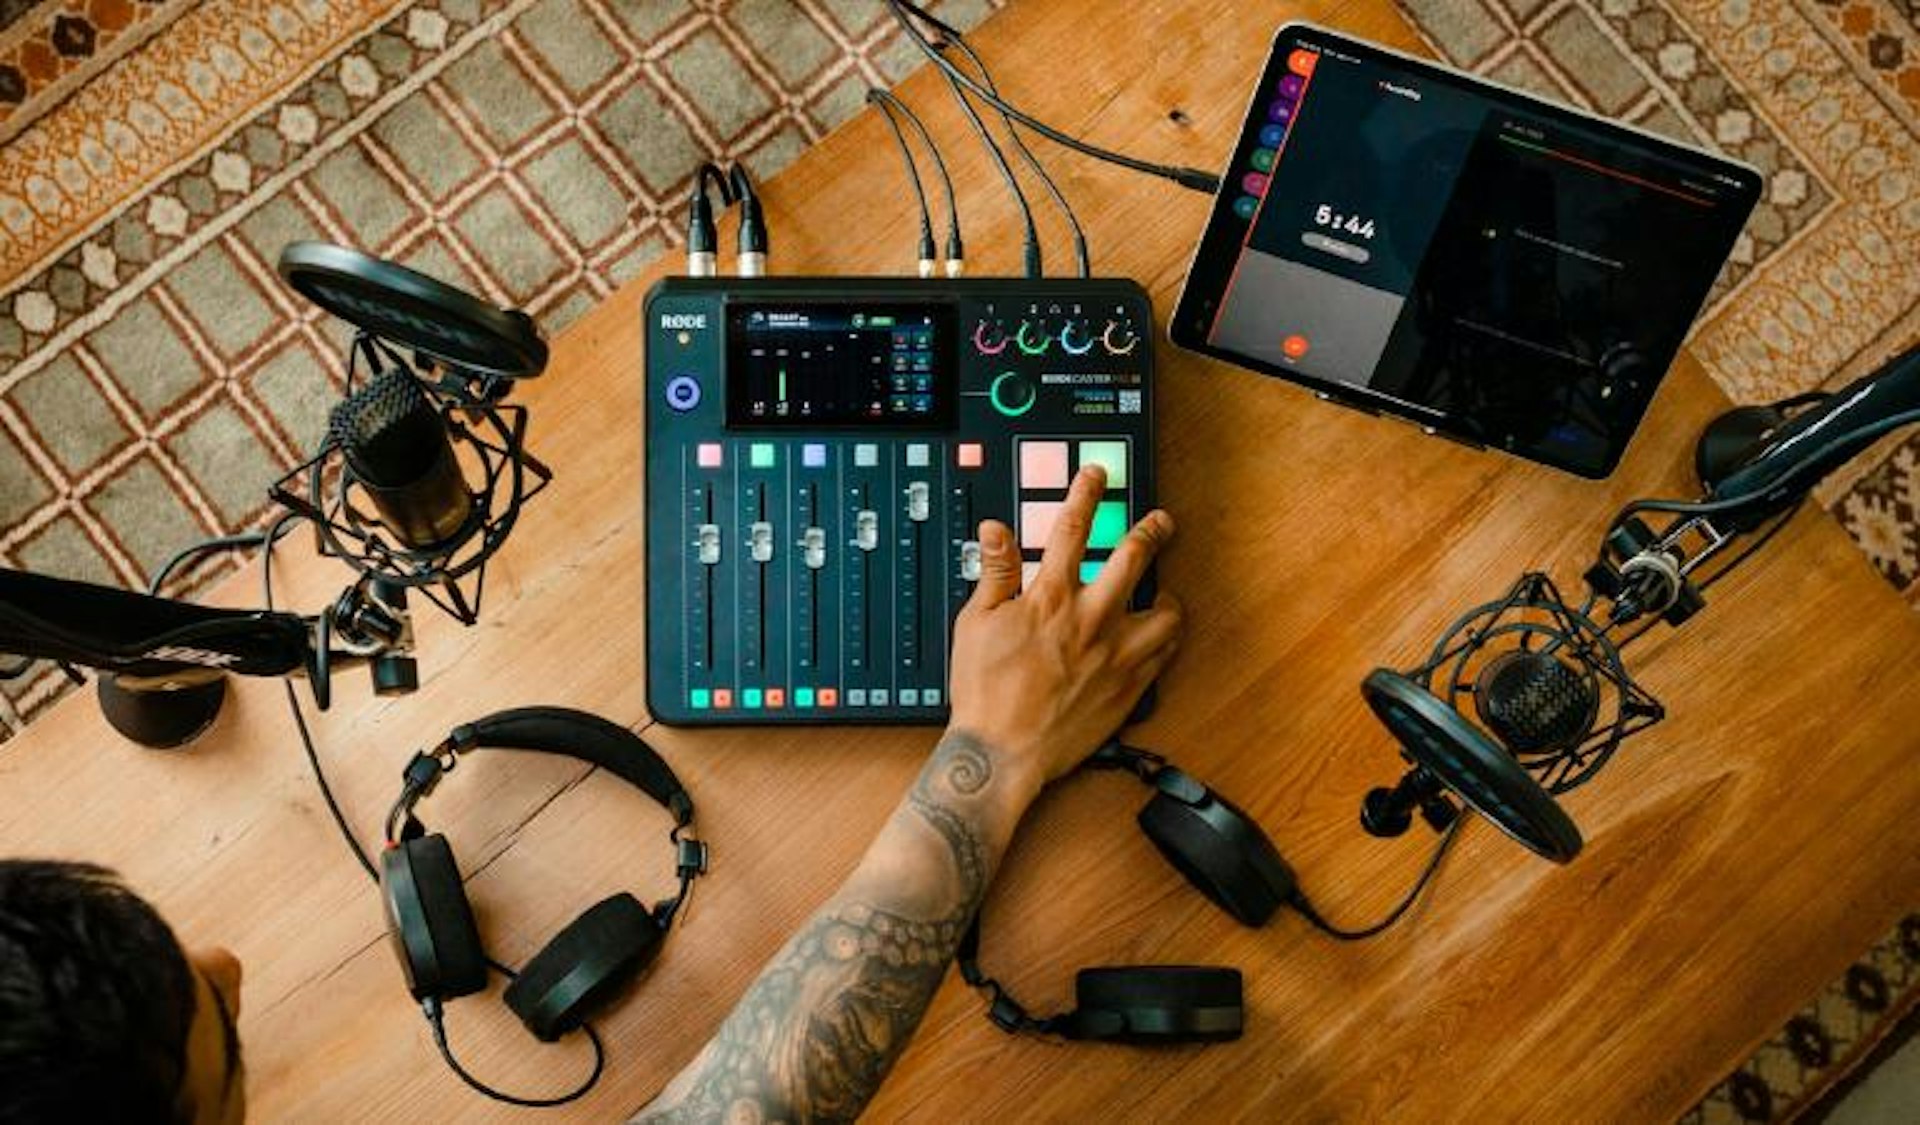 You can use the RØDE Podcast Bundle in place of Focusrite Podcast Equipment Bundles.